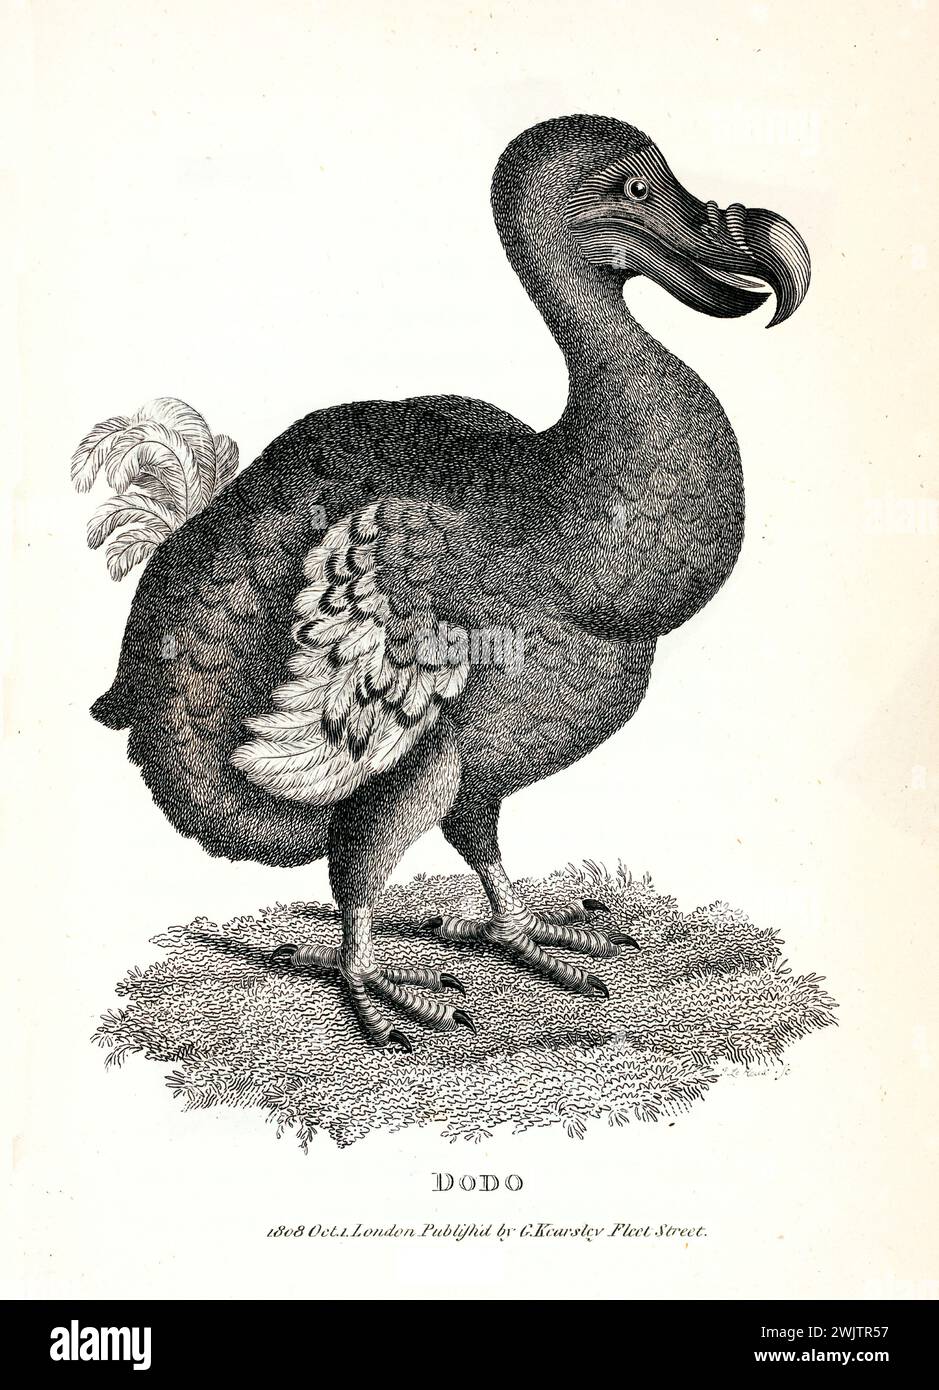 Old engraved illustration of Dodo. Created by George Shaw, published in Zoological Lectures, London, 1809 Stock Photo